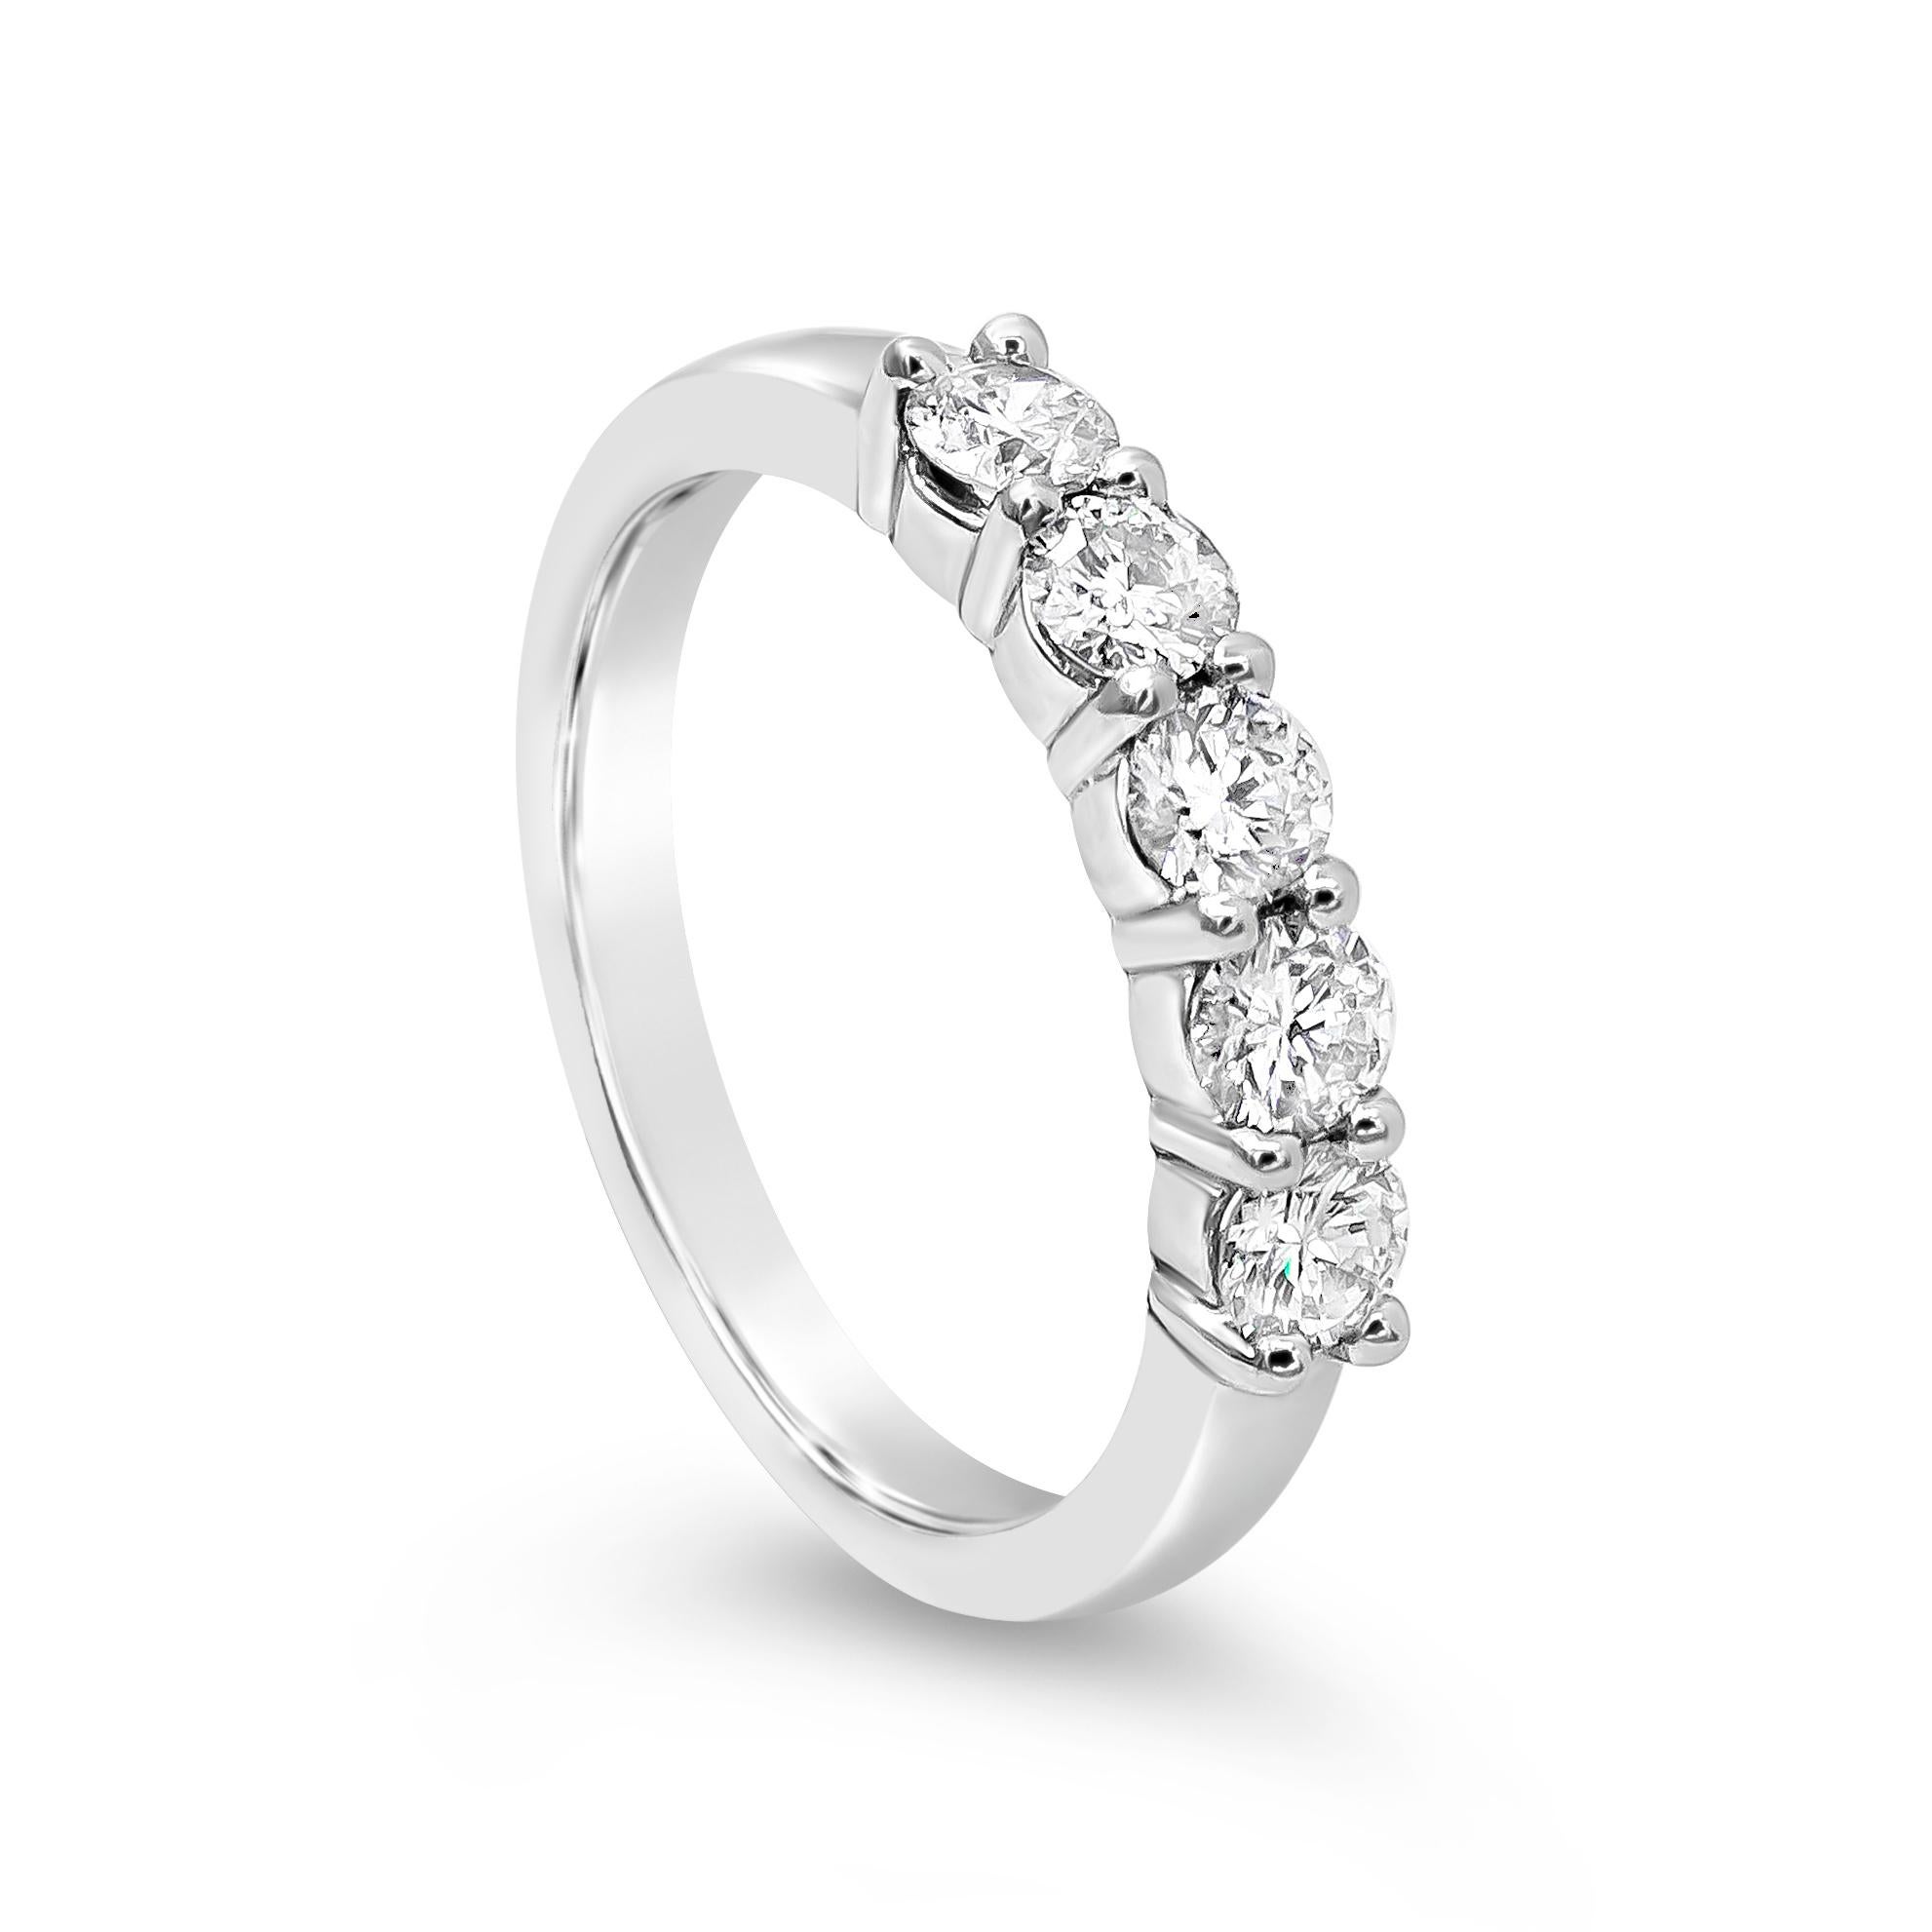 A classic wedding band style showcasing five round brilliant diamonds weighing 0.75 carats total. Made with Platinum. Size 6 US

Style available in different price ranges. Prices are based on your selection. Please contact us for more information.